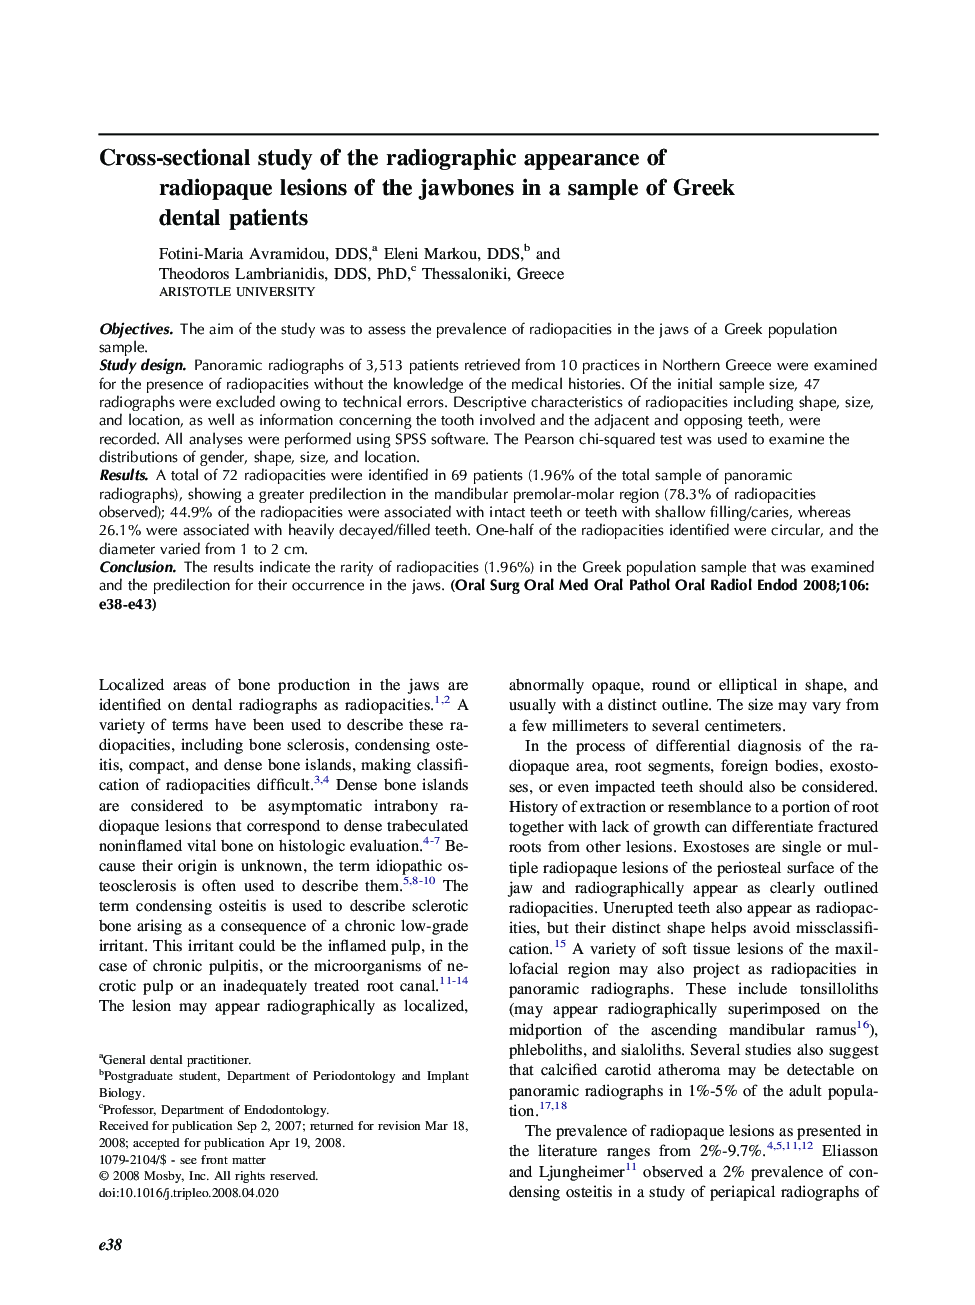 Cross-sectional study of the radiographic appearance of radiopaque lesions of the jawbones in a sample of Greek dental patients